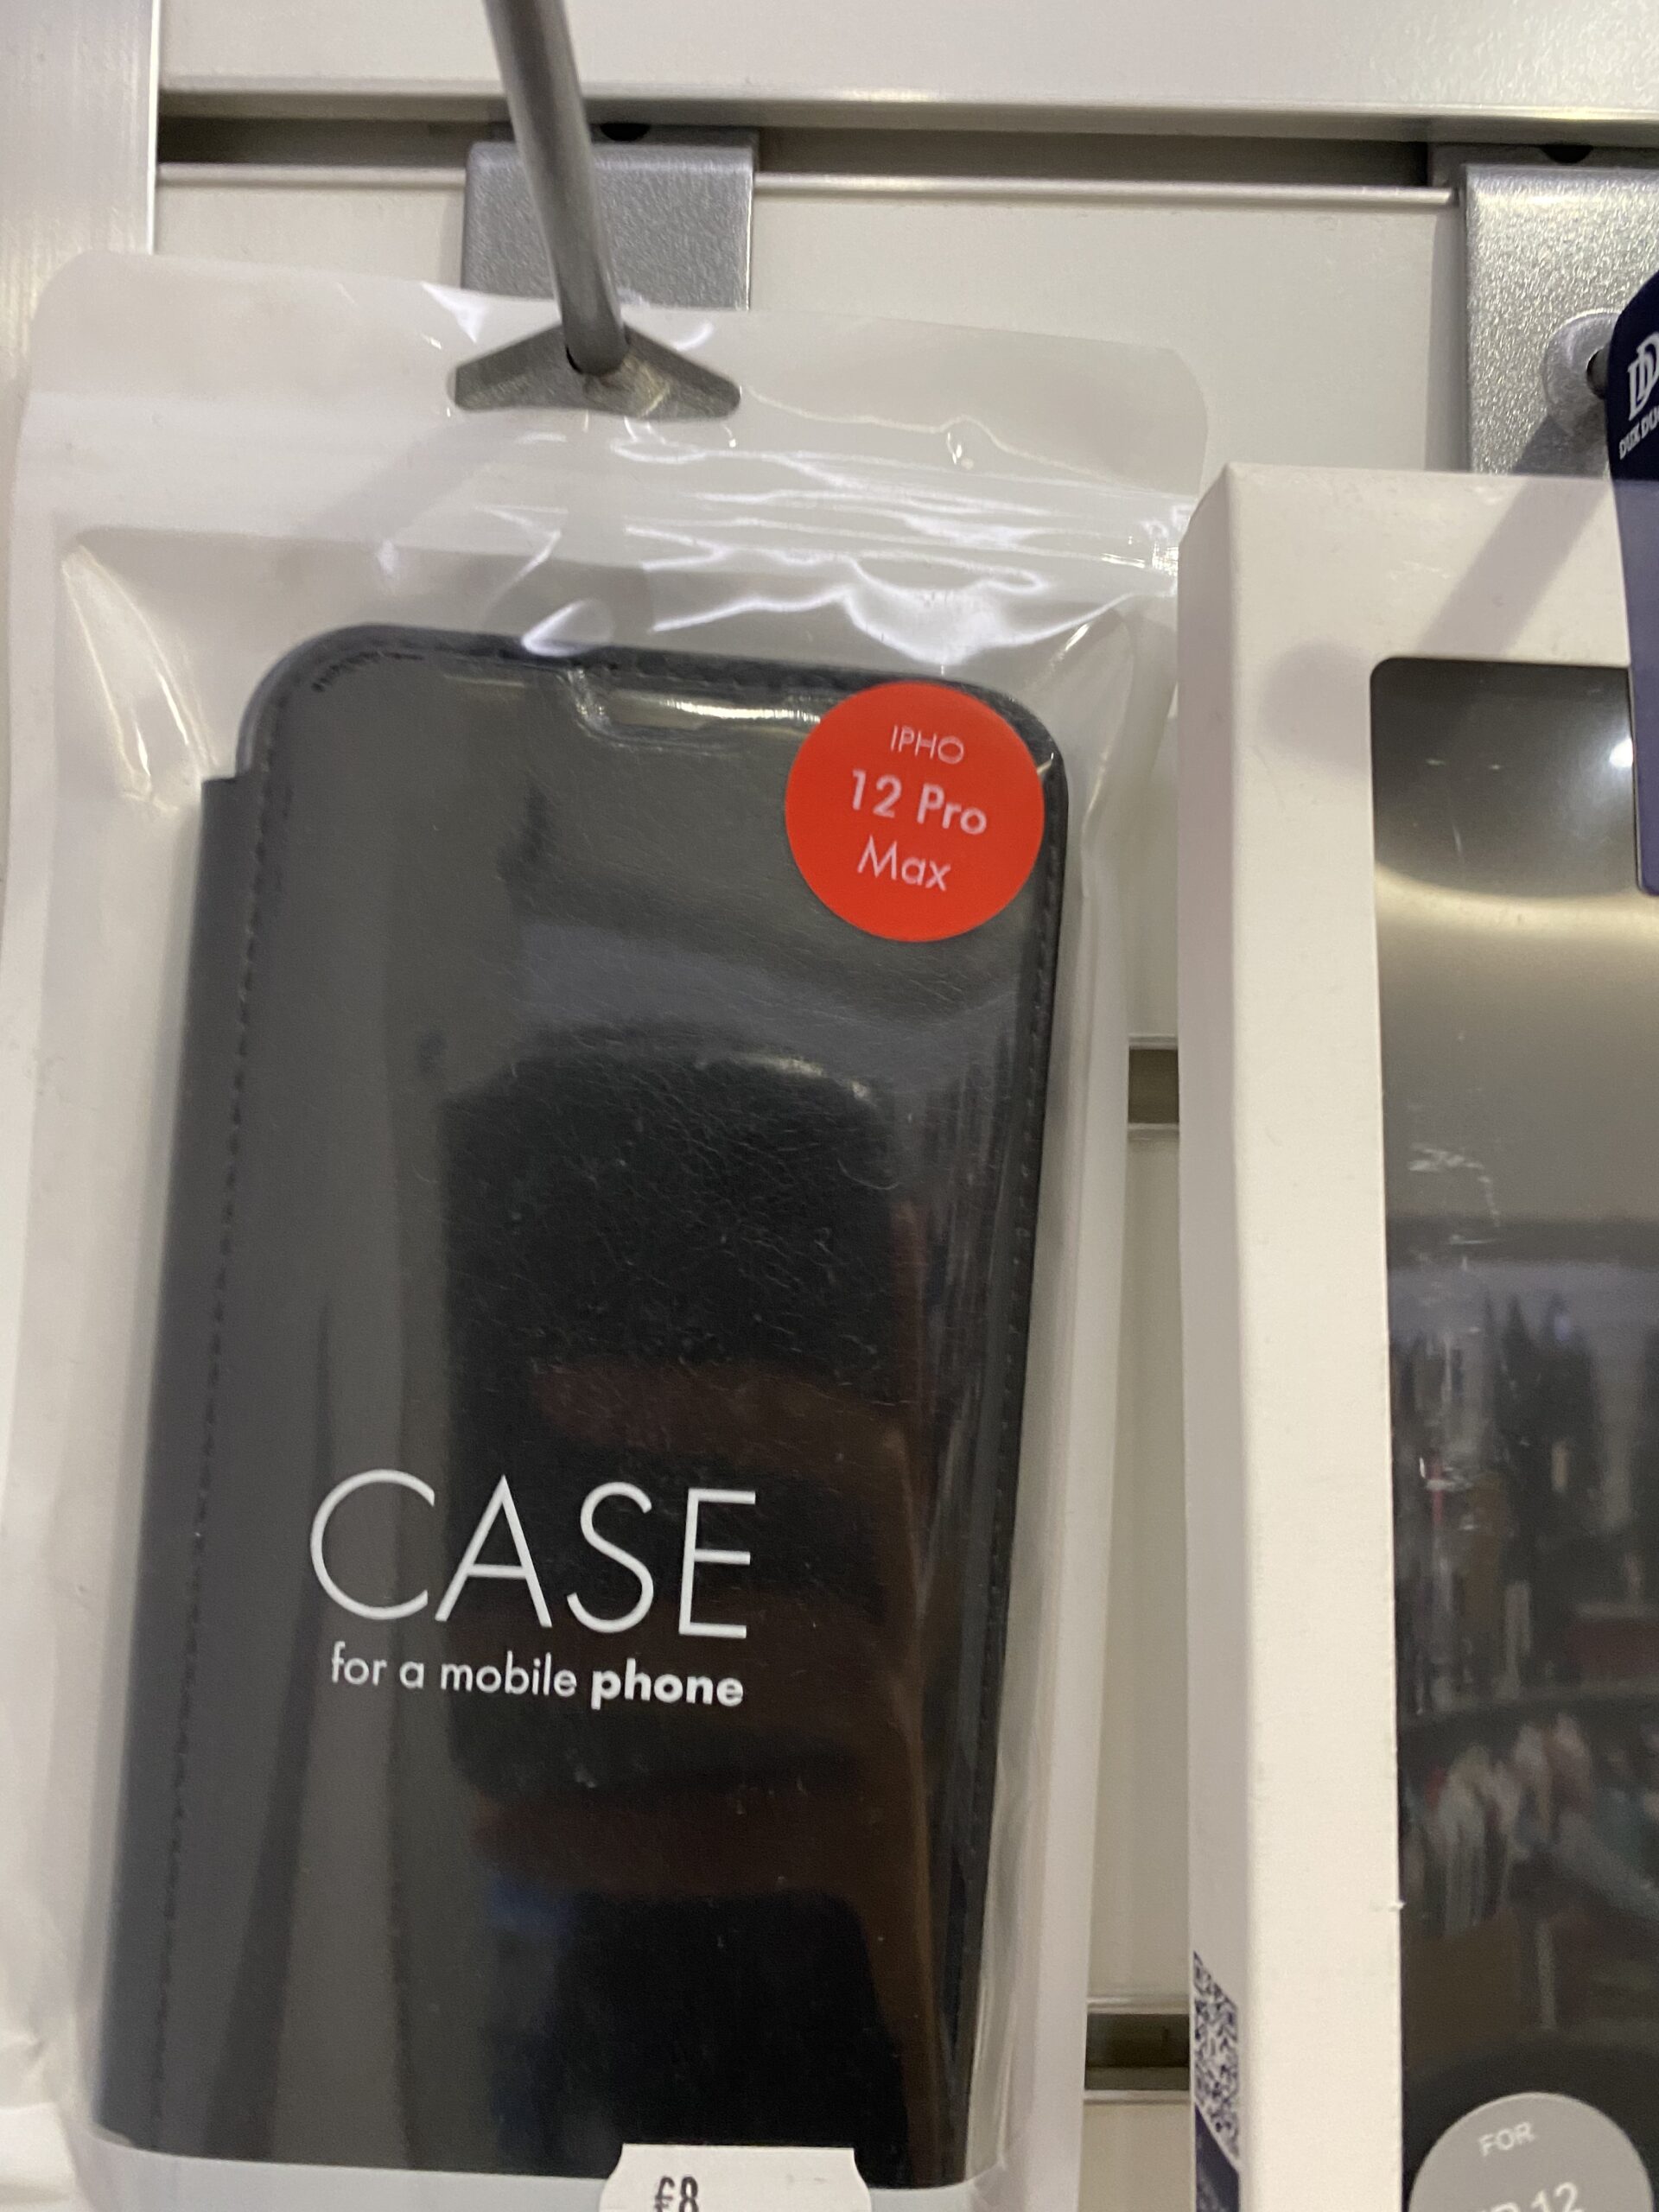 Phone cases and accessories